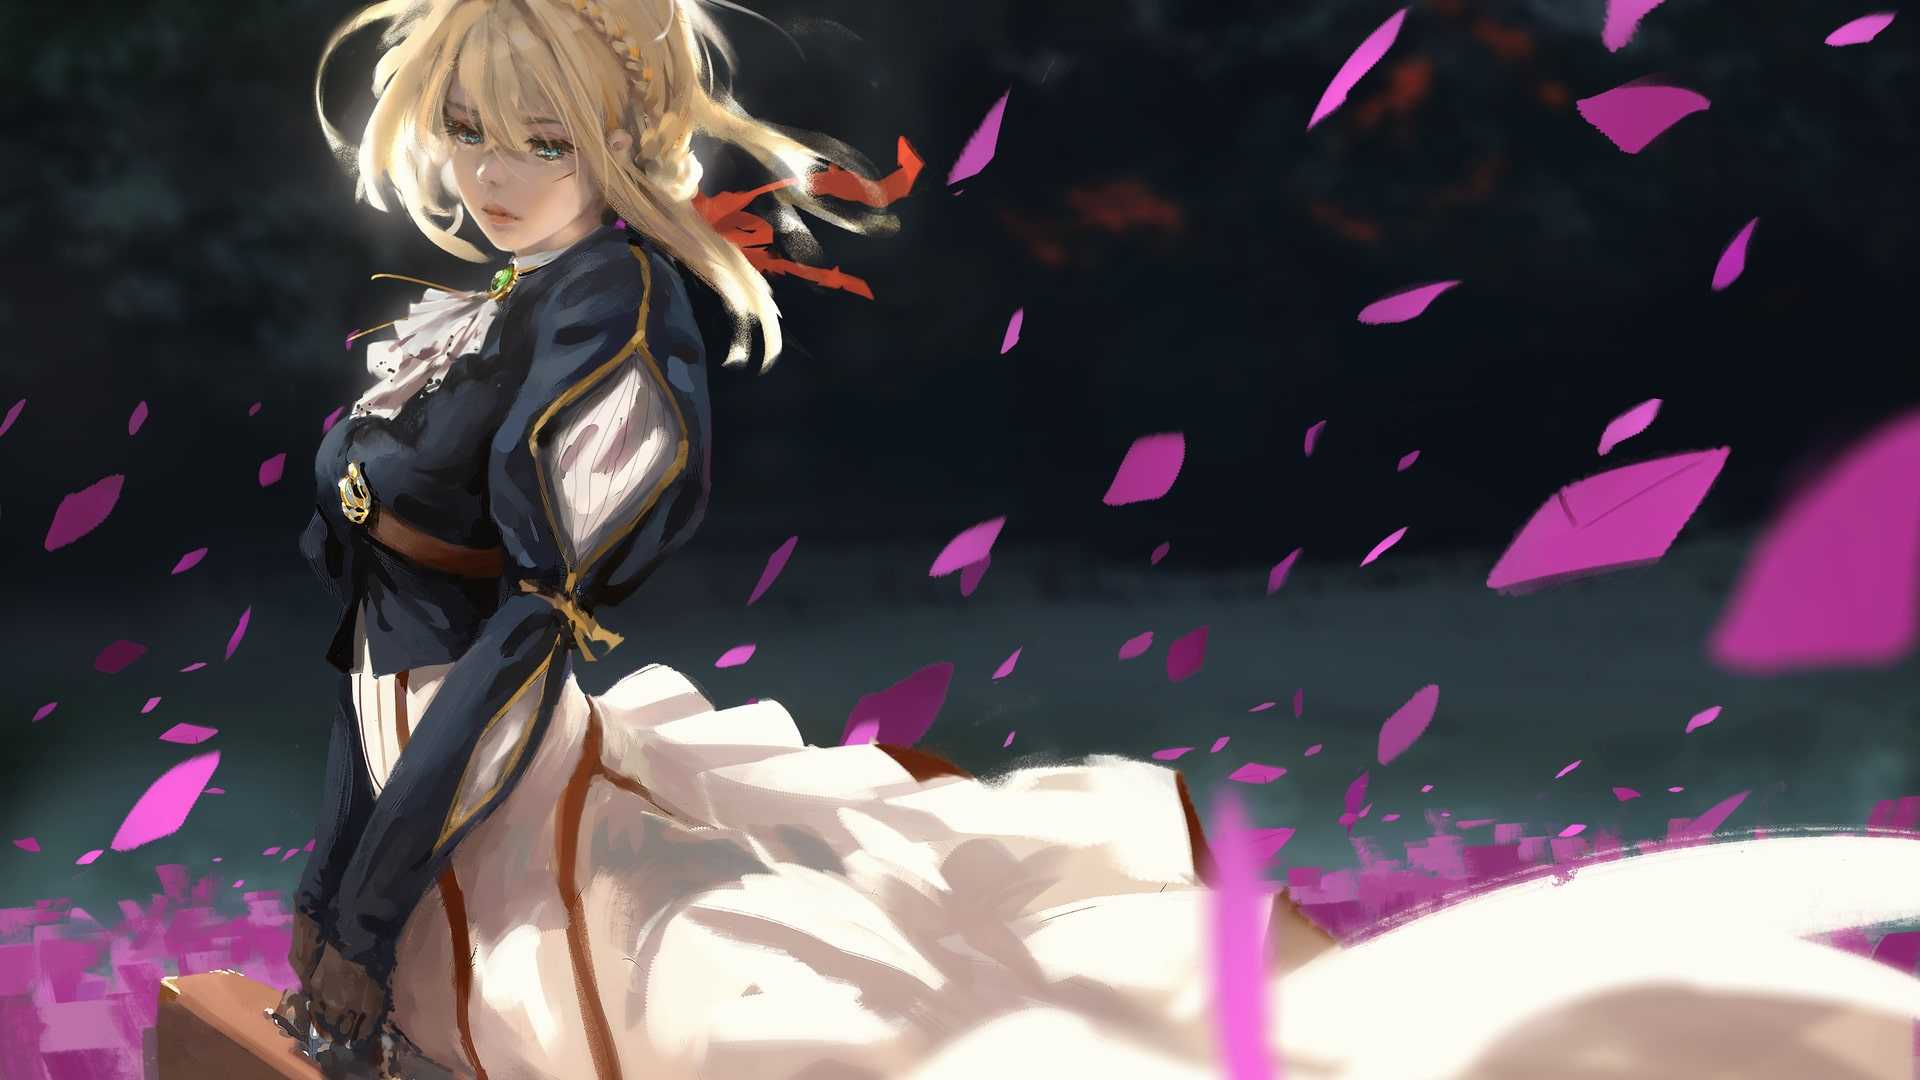 HD Violet Evergarden Wallpapers - KoLPaPer - Awesome Free HD Wallpapers